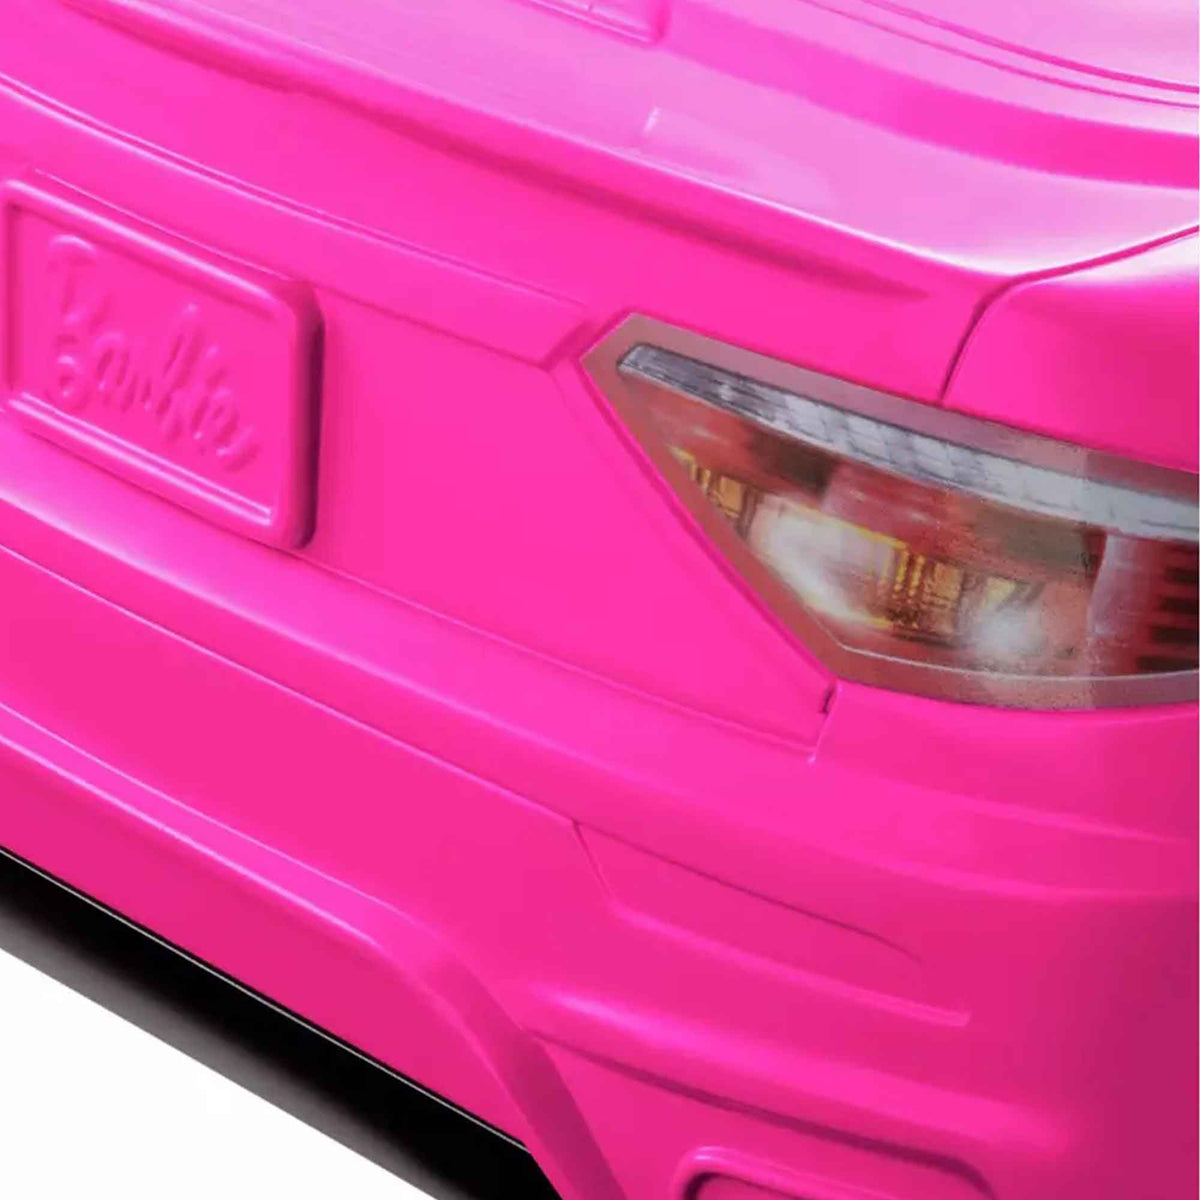 Barbie Pink Convertible 2-Seater Vehicle with Rolling Wheels